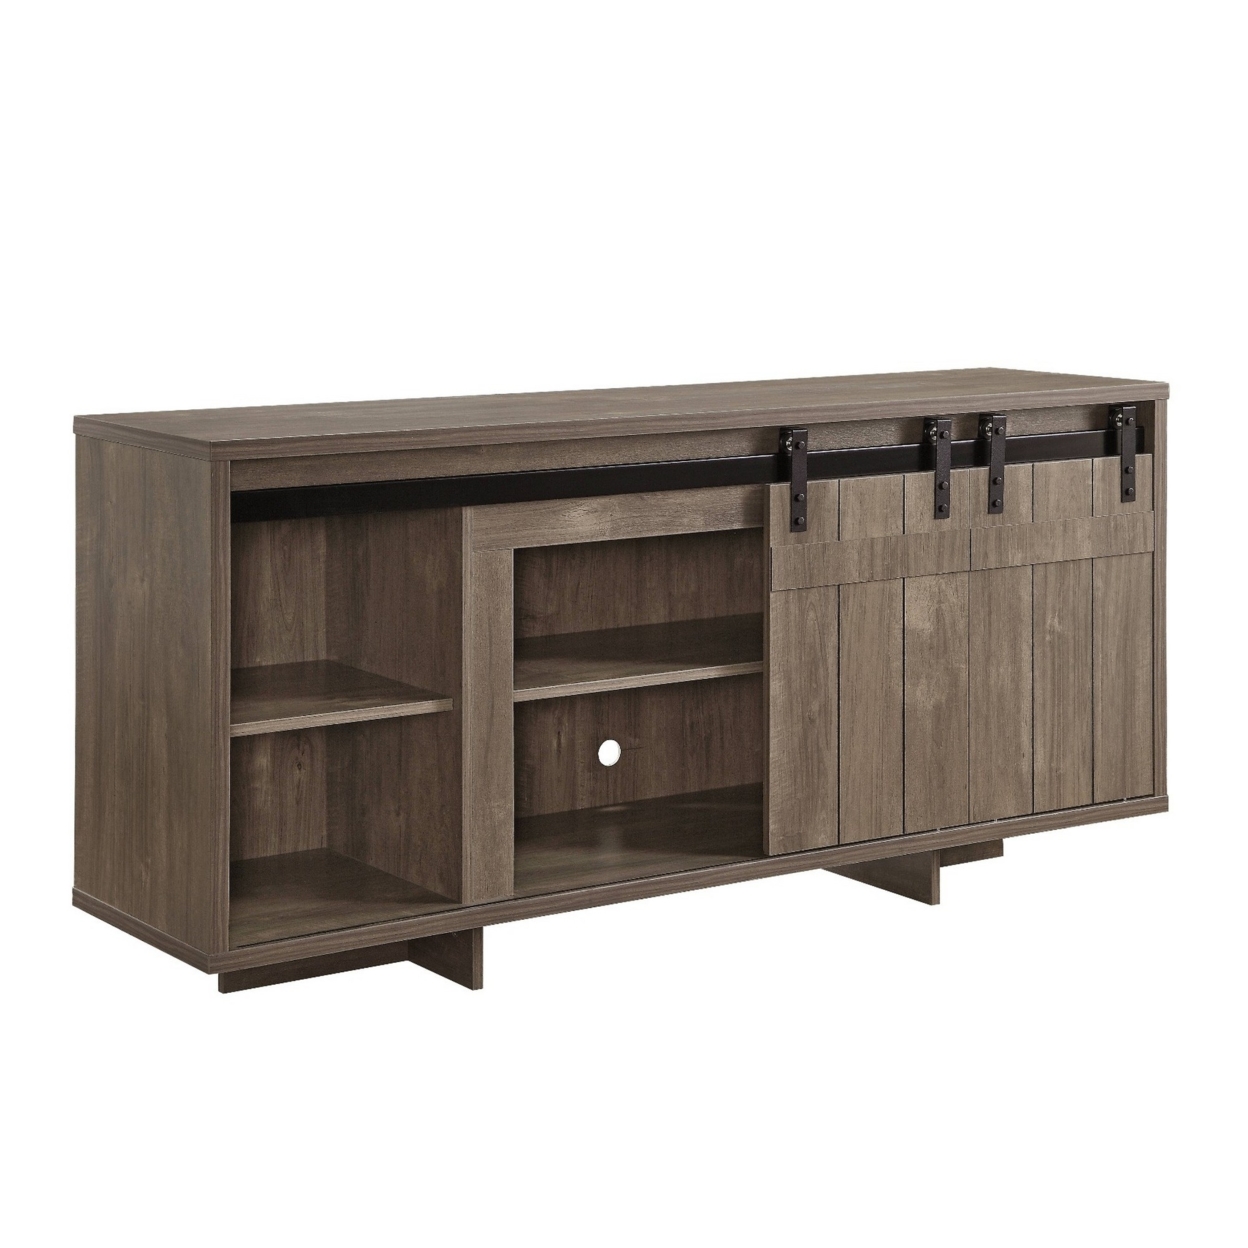 TV Stand With 4 Compartments And 2 Barn Sliding Door, Gray- Saltoro Sherpi